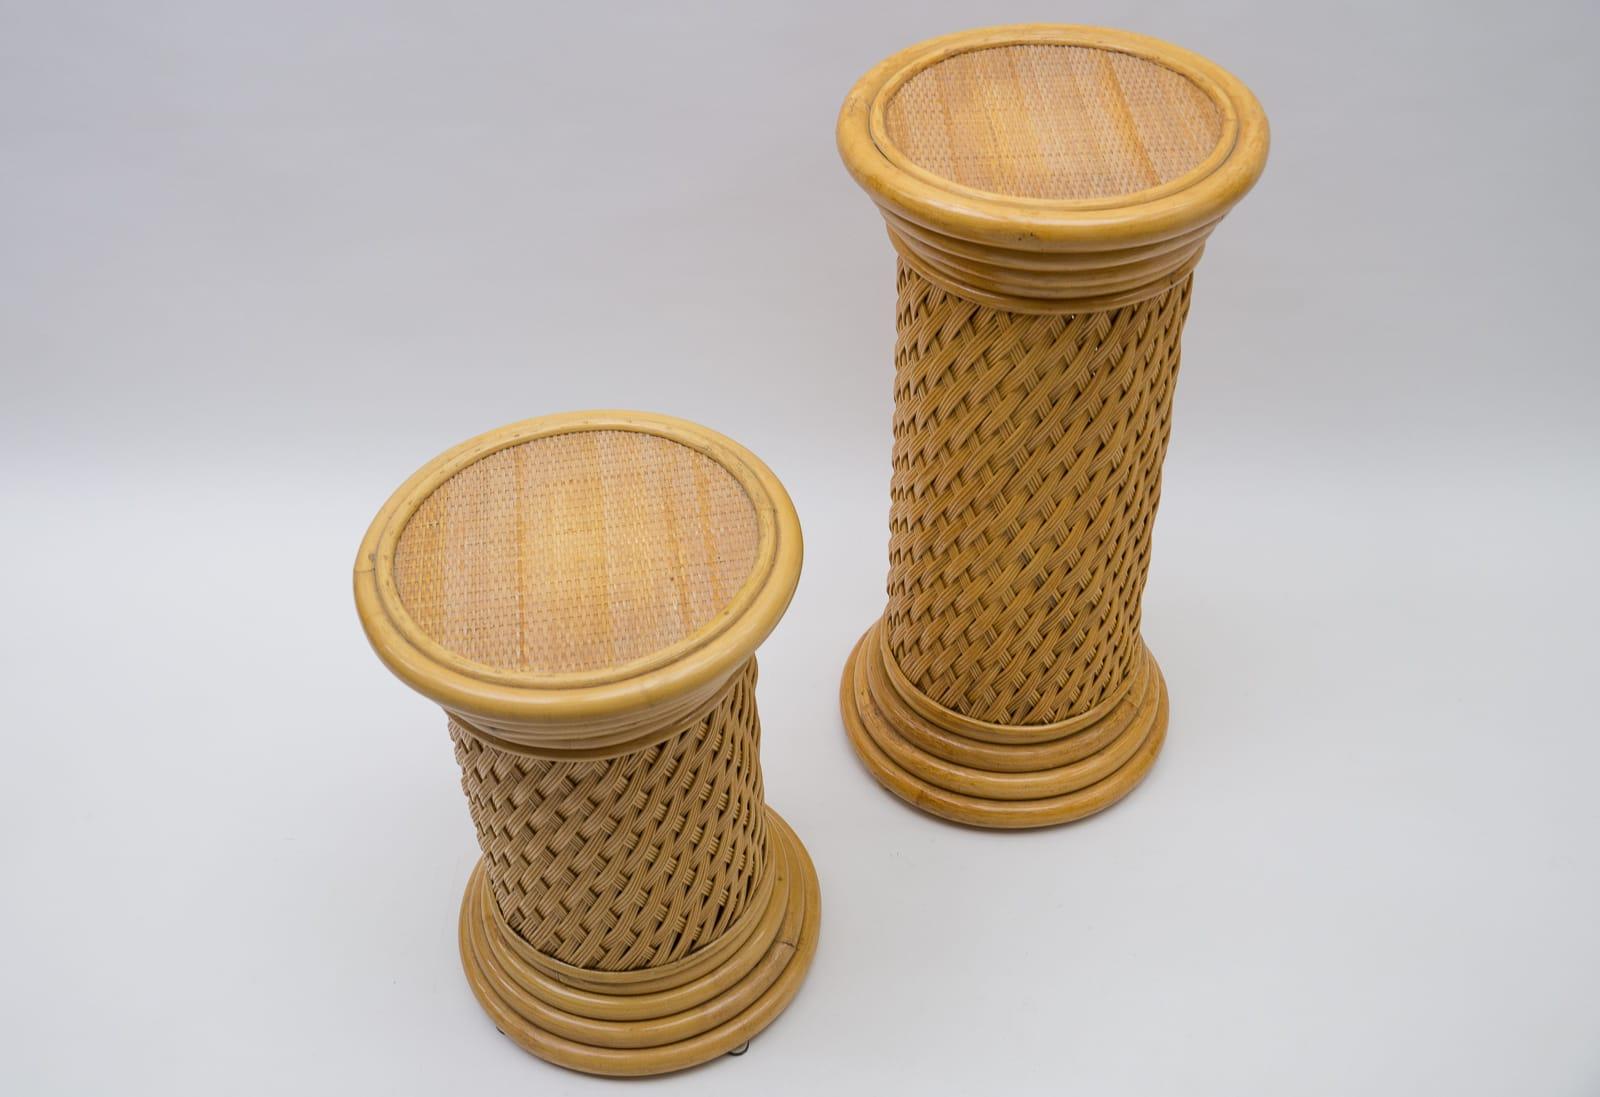 2 Elegant Hollywood Regency Rattan Wicker and Bamboo Columns, 1960s, Italy For Sale 6